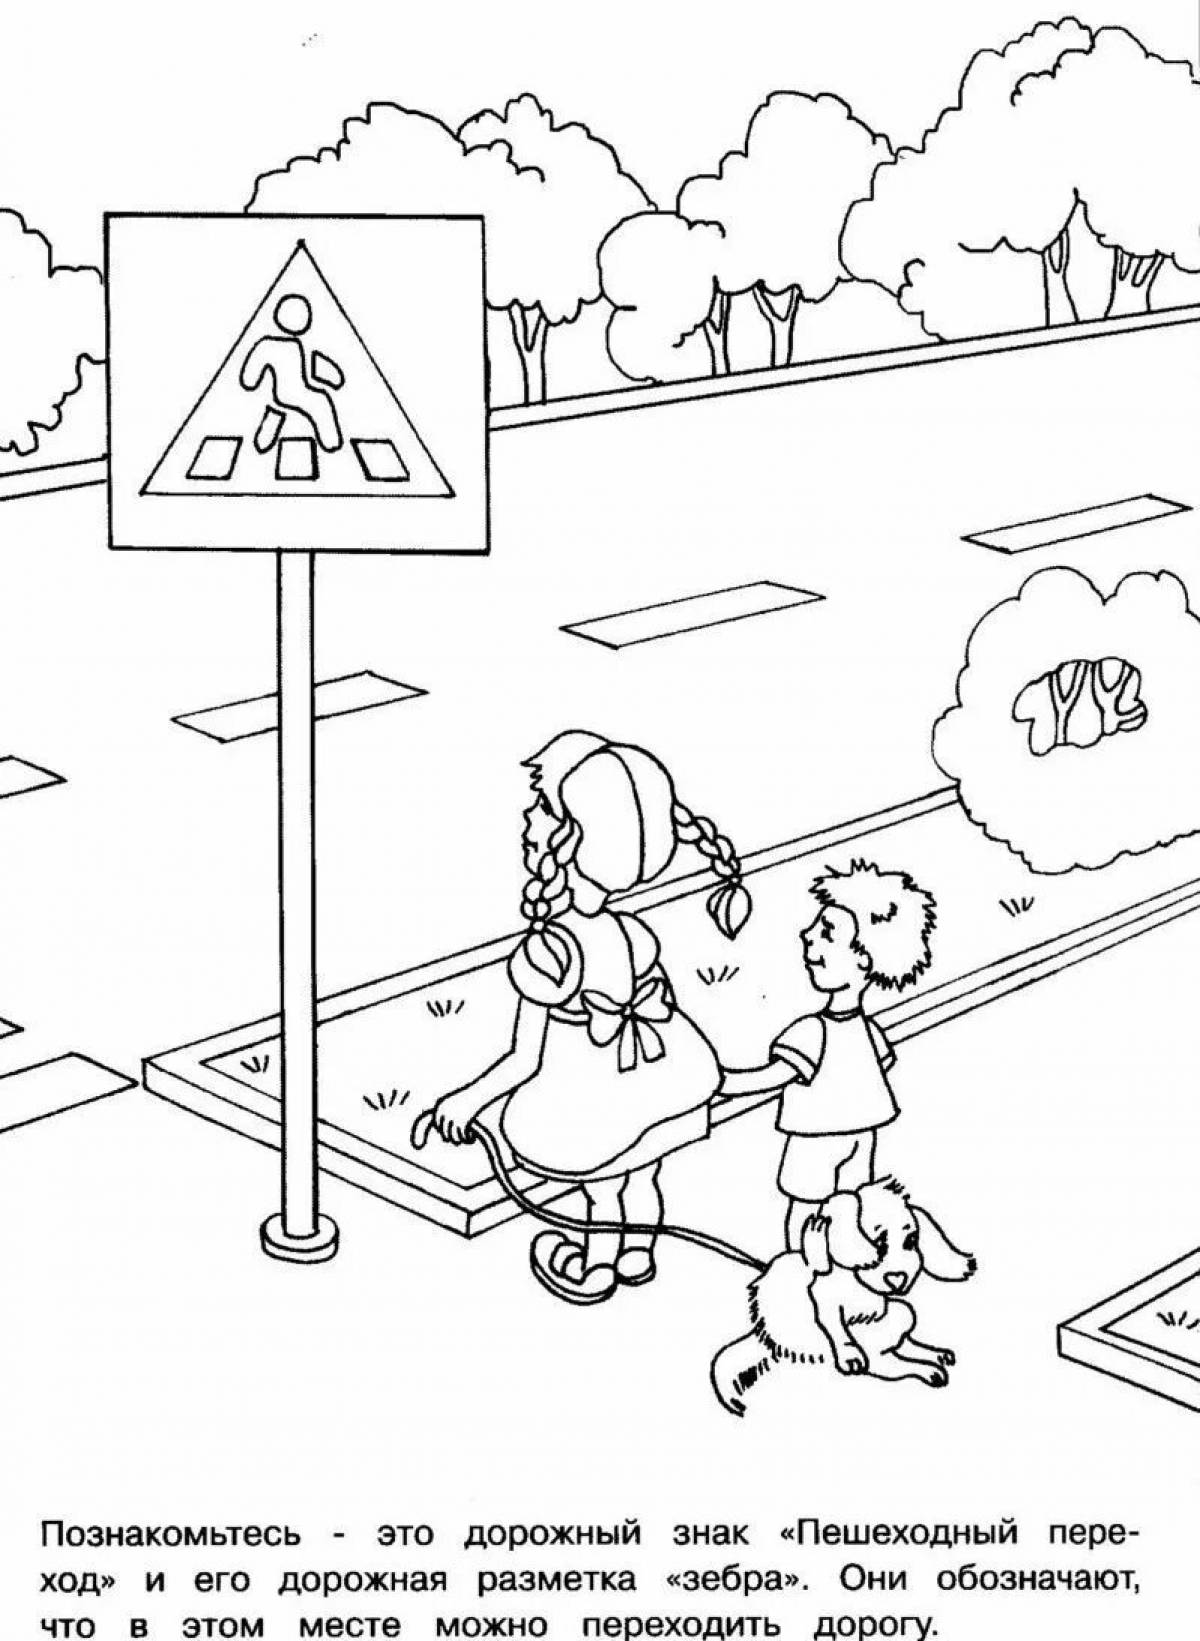 On the topic of traffic rules in kindergarten #6